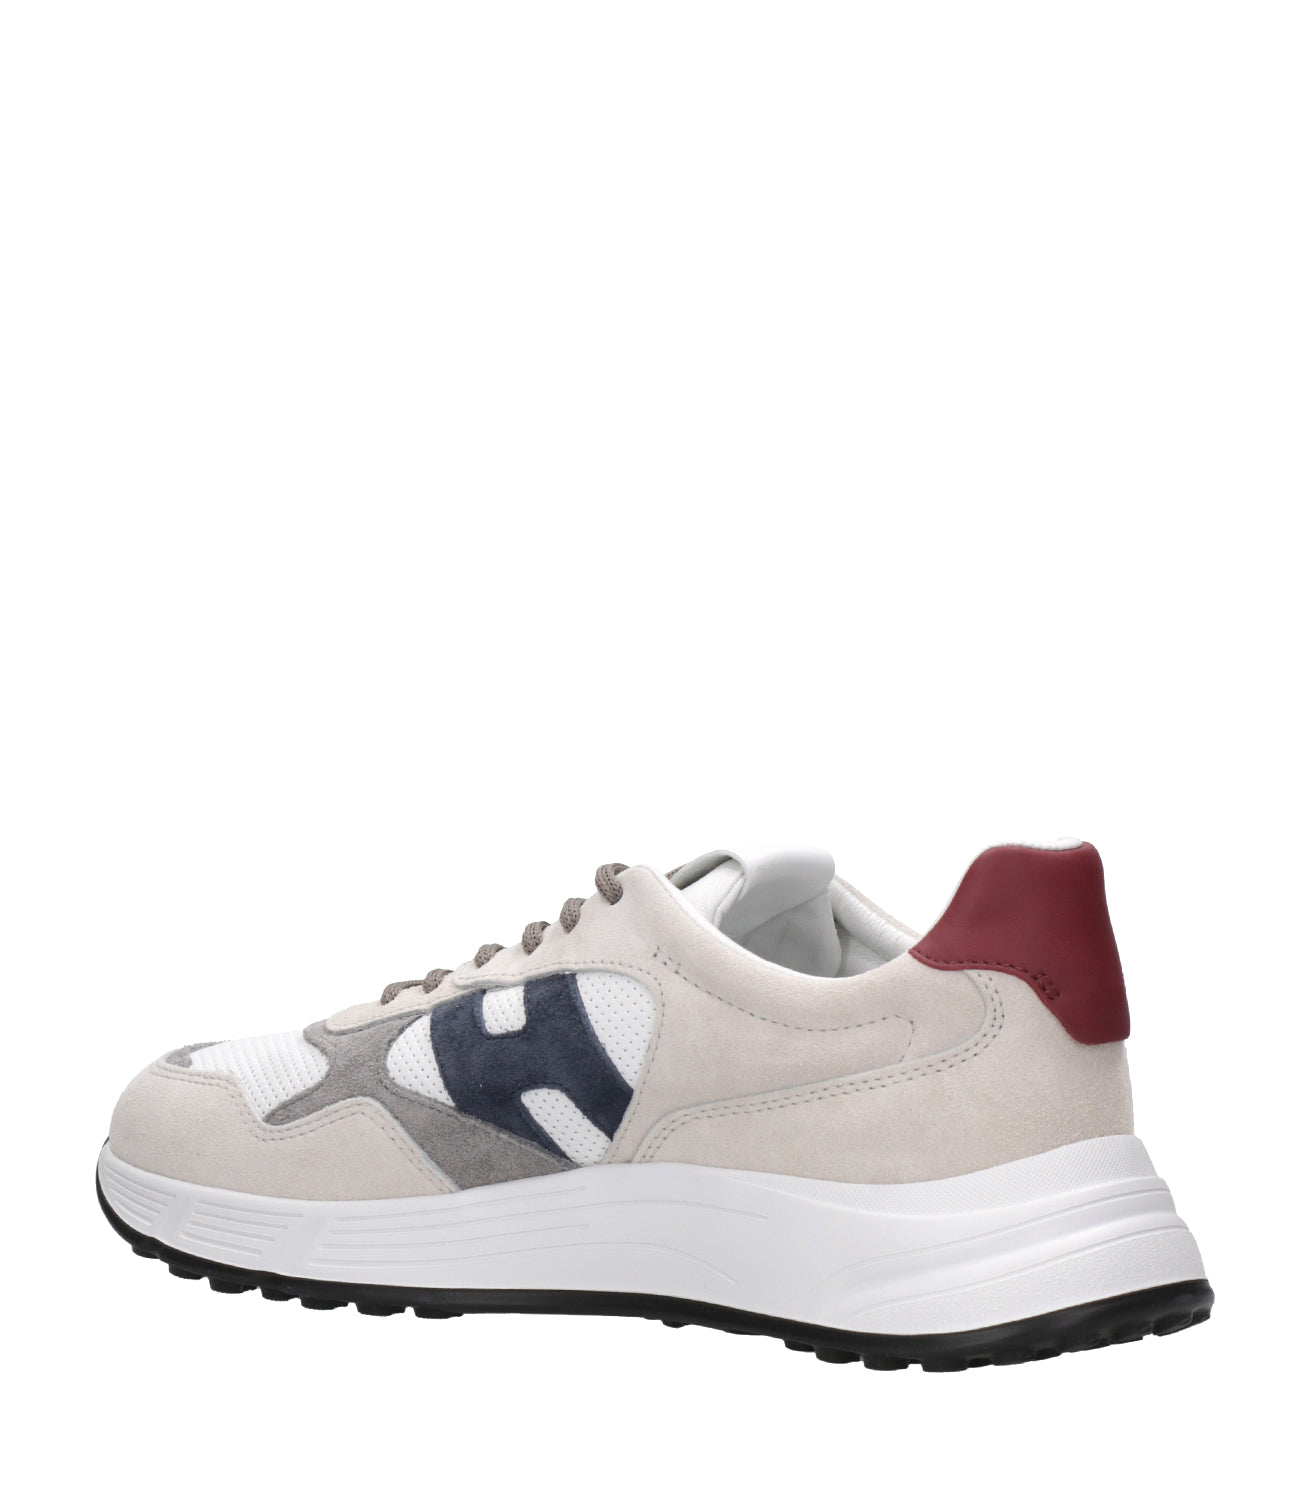 Hogan | Sneakers Hyperlight H Punched White, Grey and Bordeaux